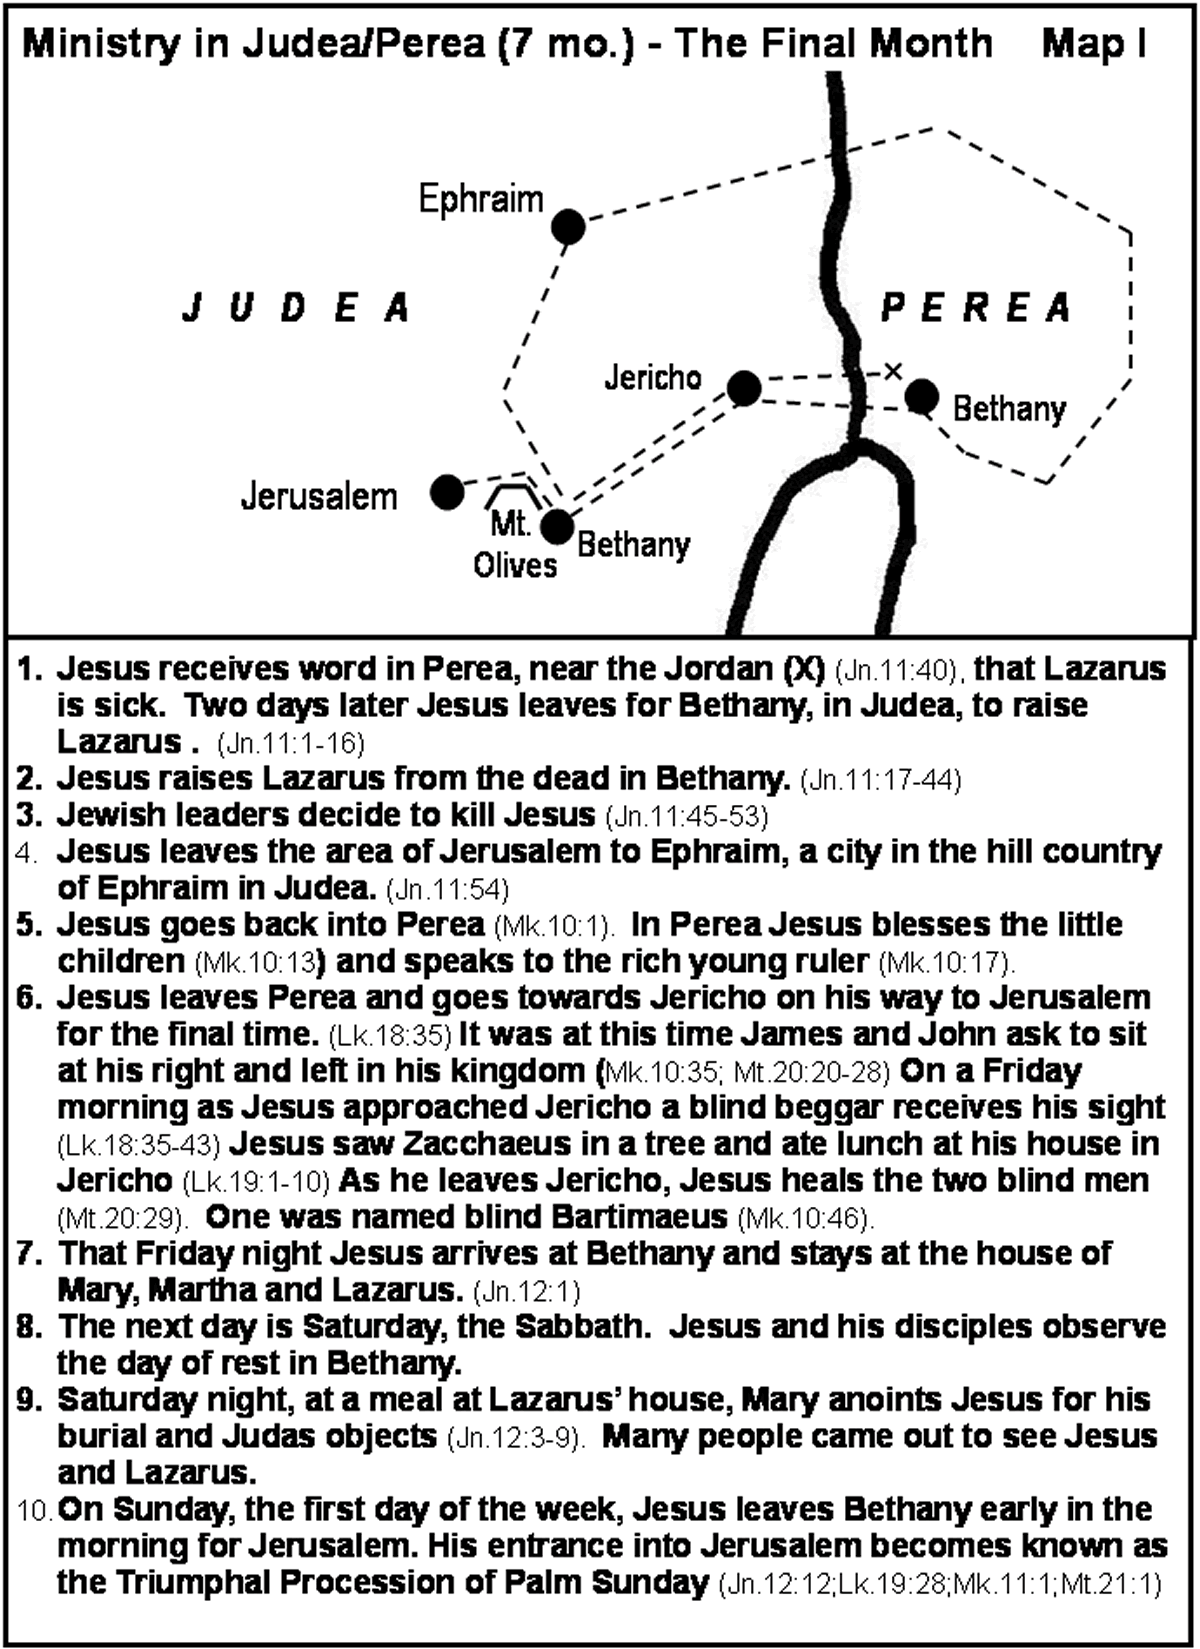 Jesus Final Month in Judea and Perea